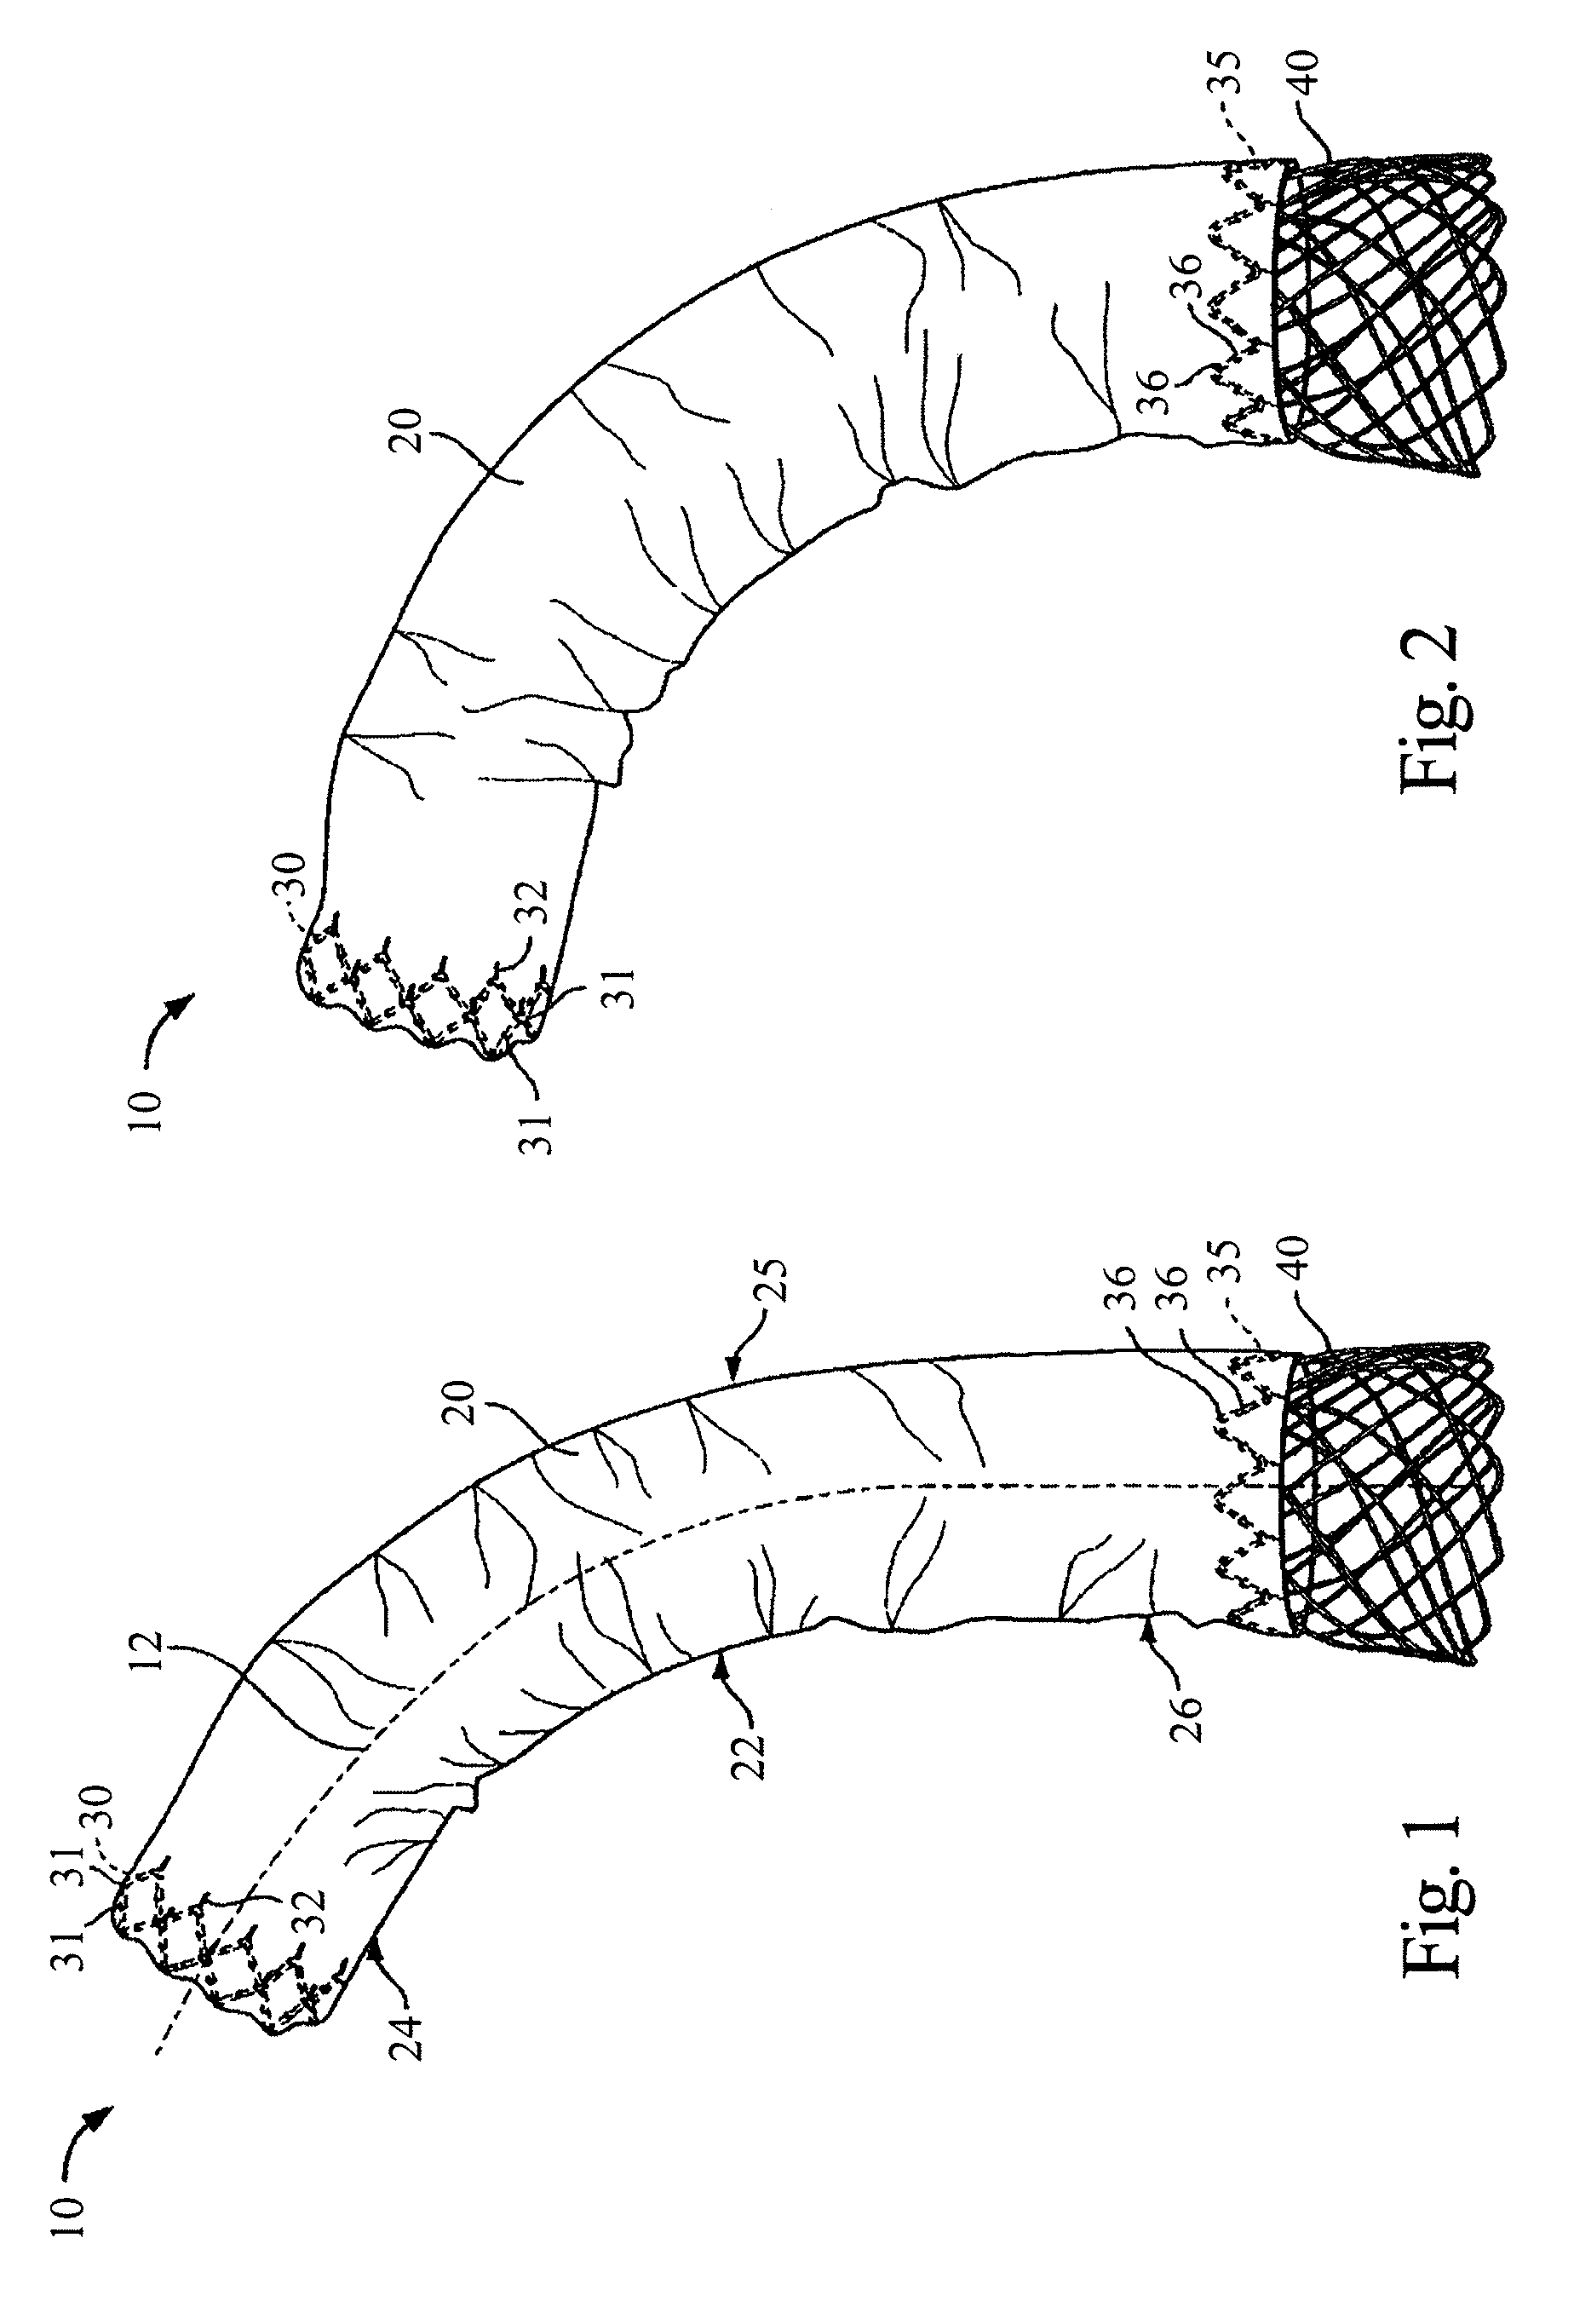 Stent Graft Delivery System for Accurate Deployment